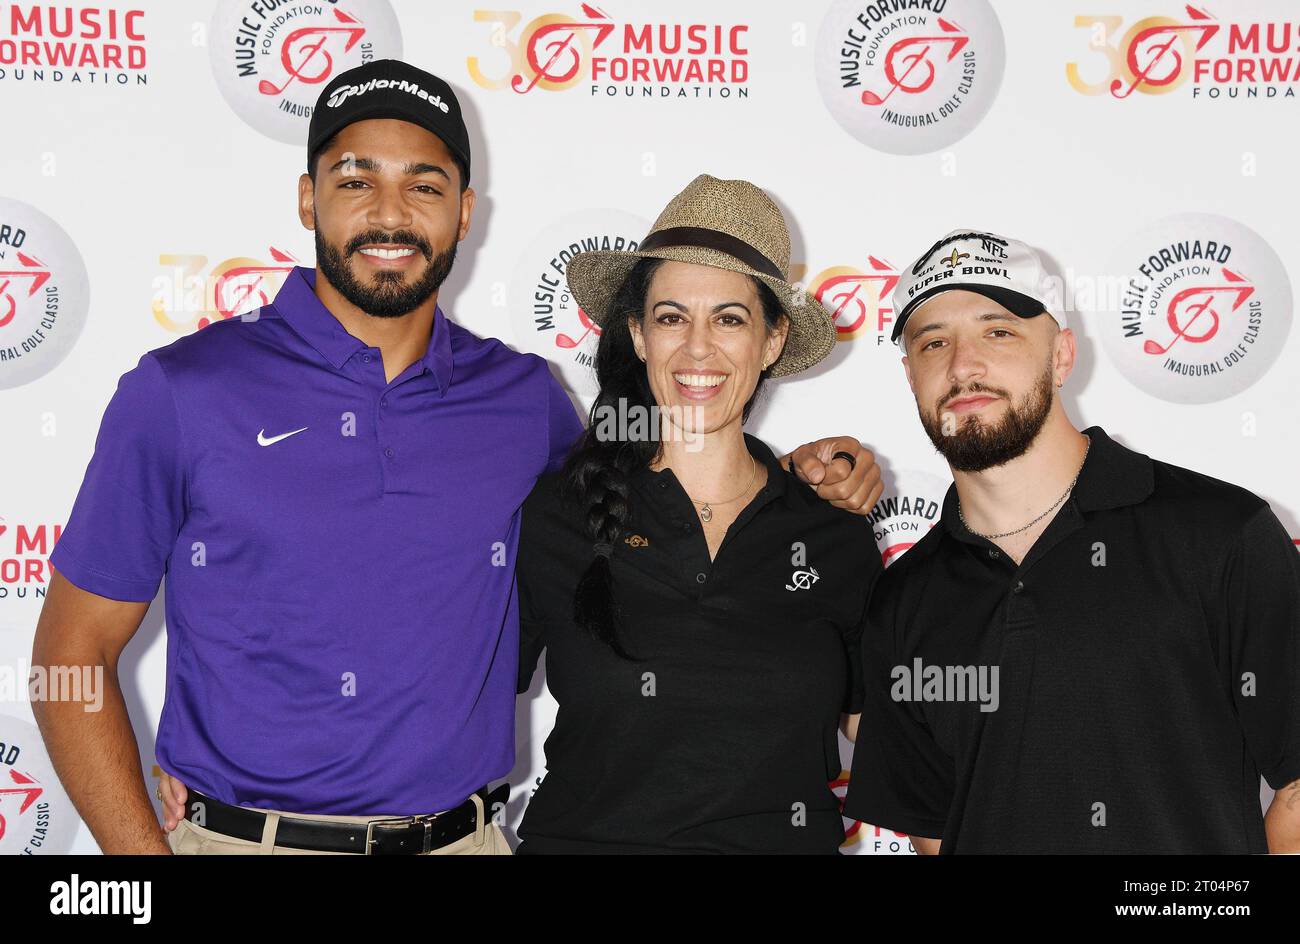 TARZANA, CALIFORNIA - OCTOBER 02: (L-R) Michael Evans Behling, Nurit Siegel Smith and Alec King attend the Music Forward Foundation Golf Classic at El Stock Photo